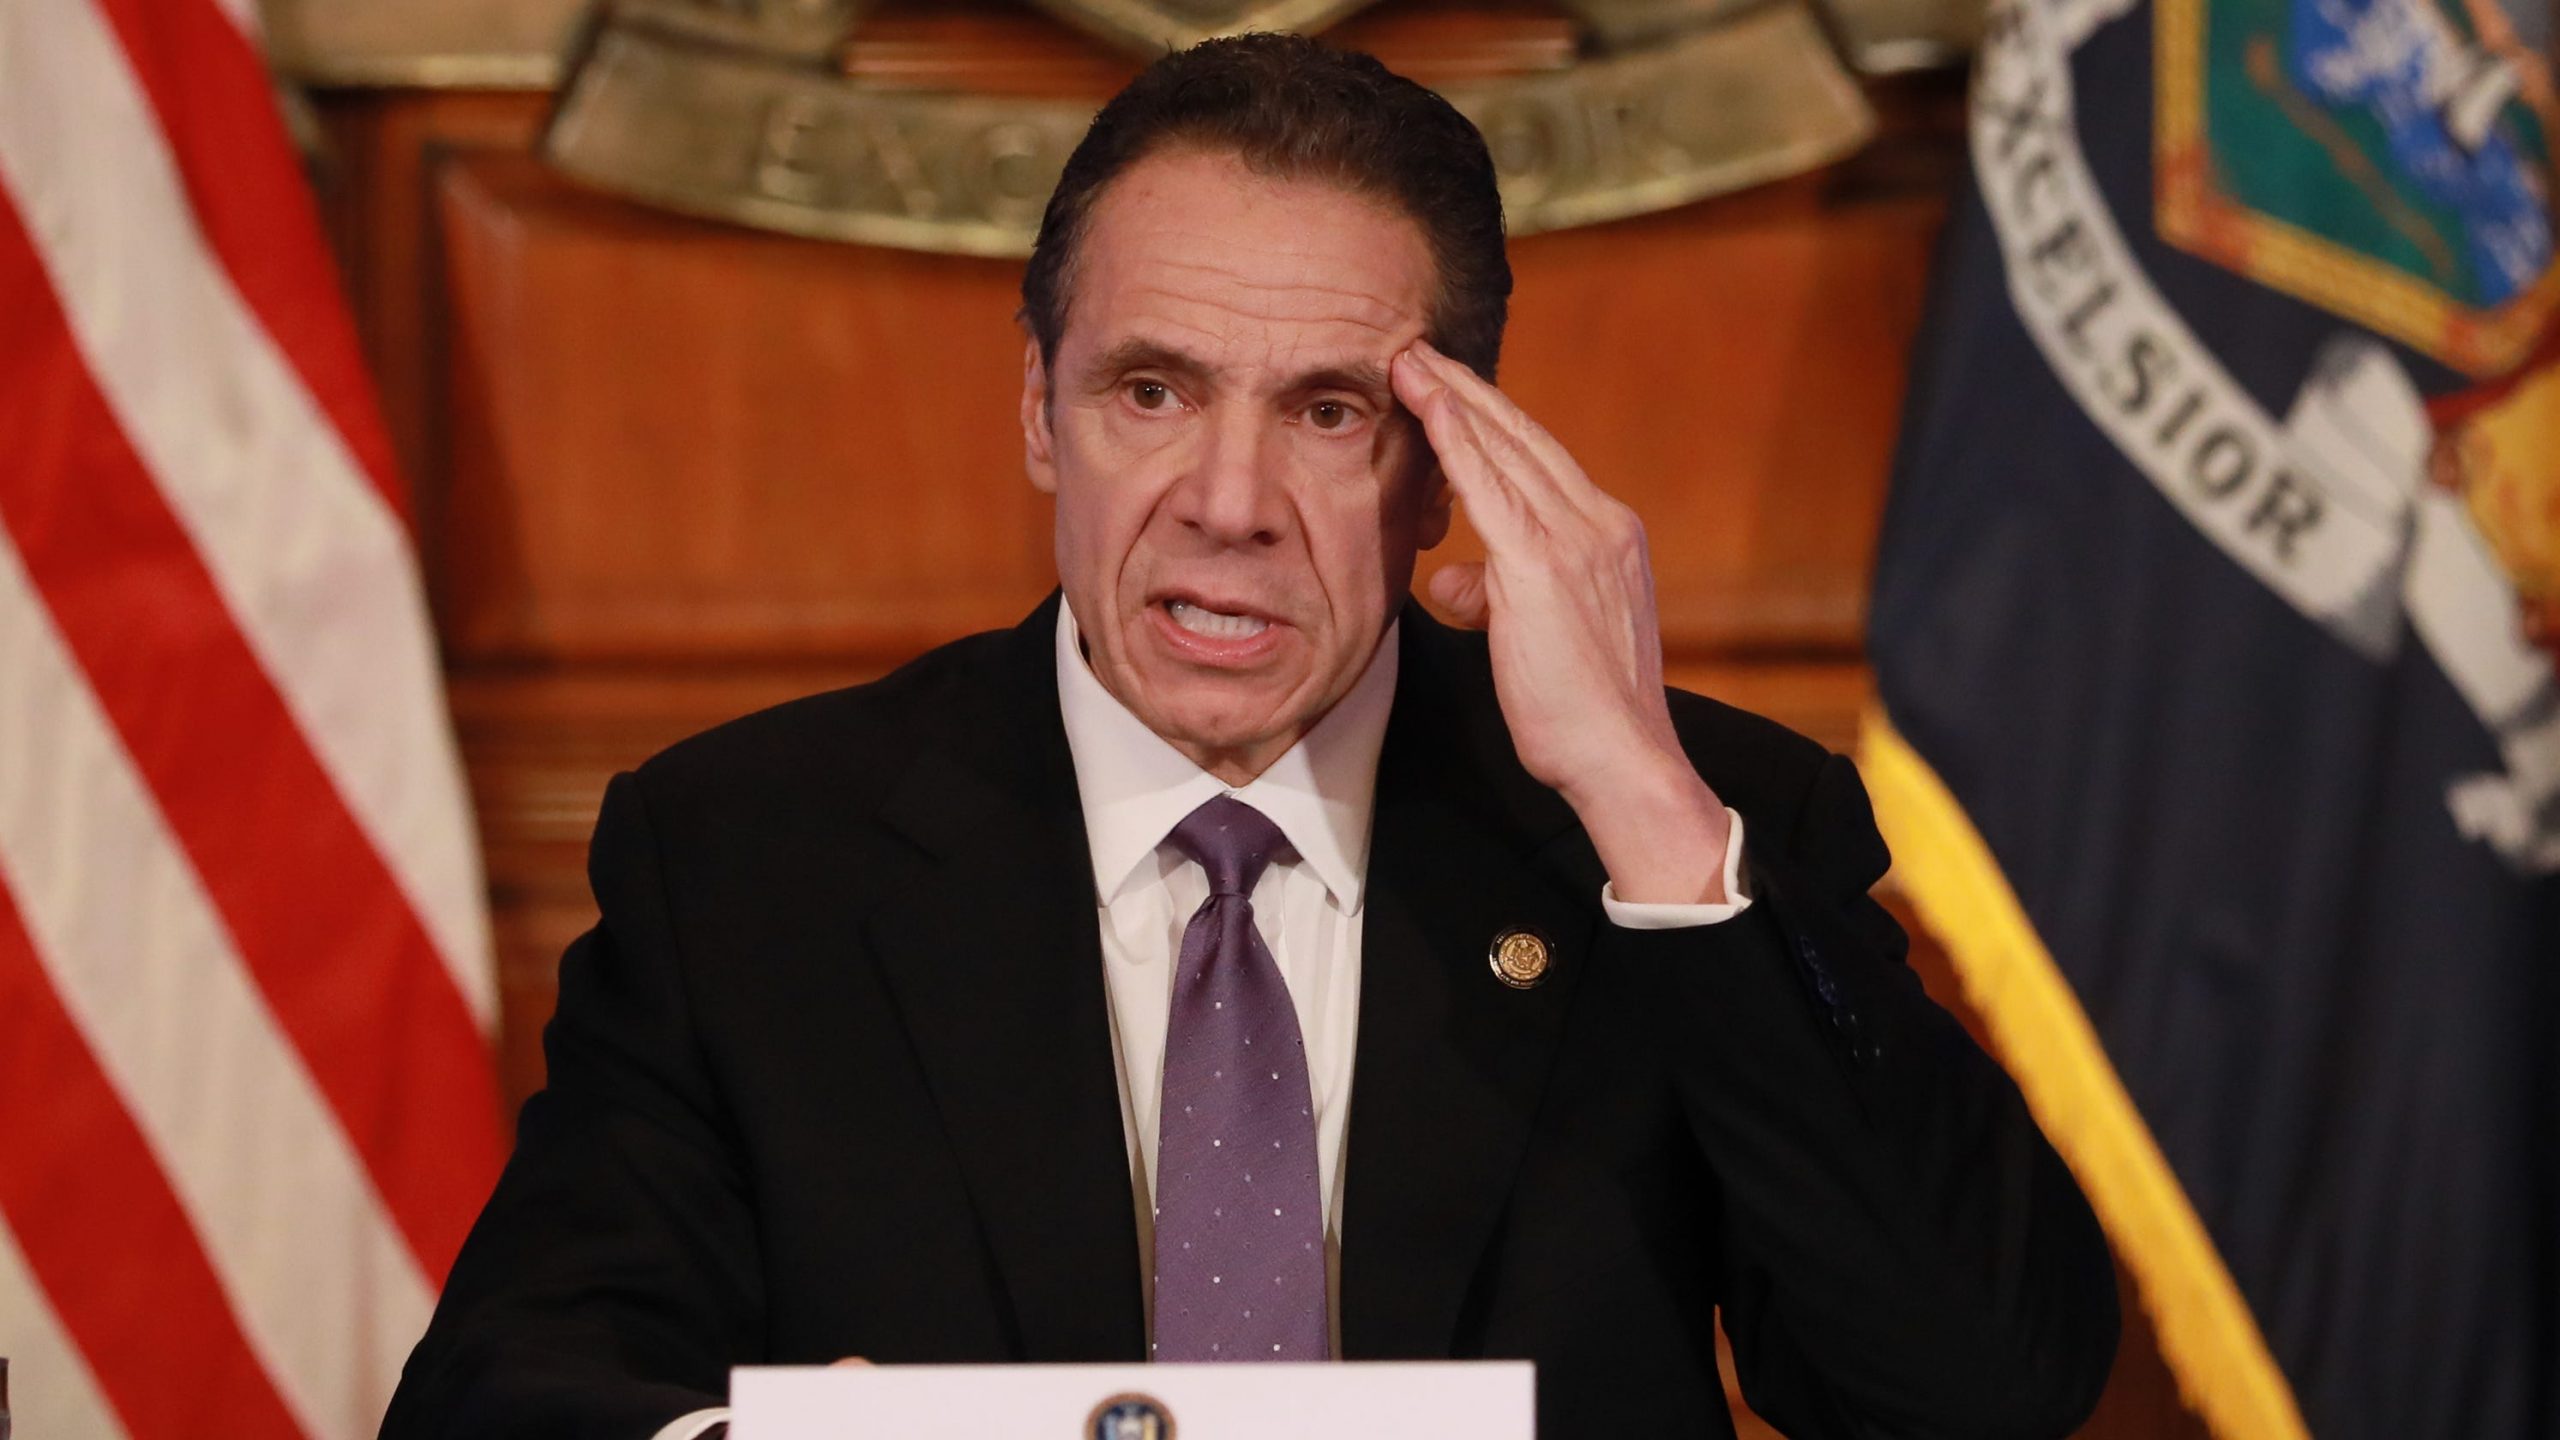 Coronavirus live updates: Cuomo spars with Trump over testing; antiviral drug shows early promise; China ups its death toll